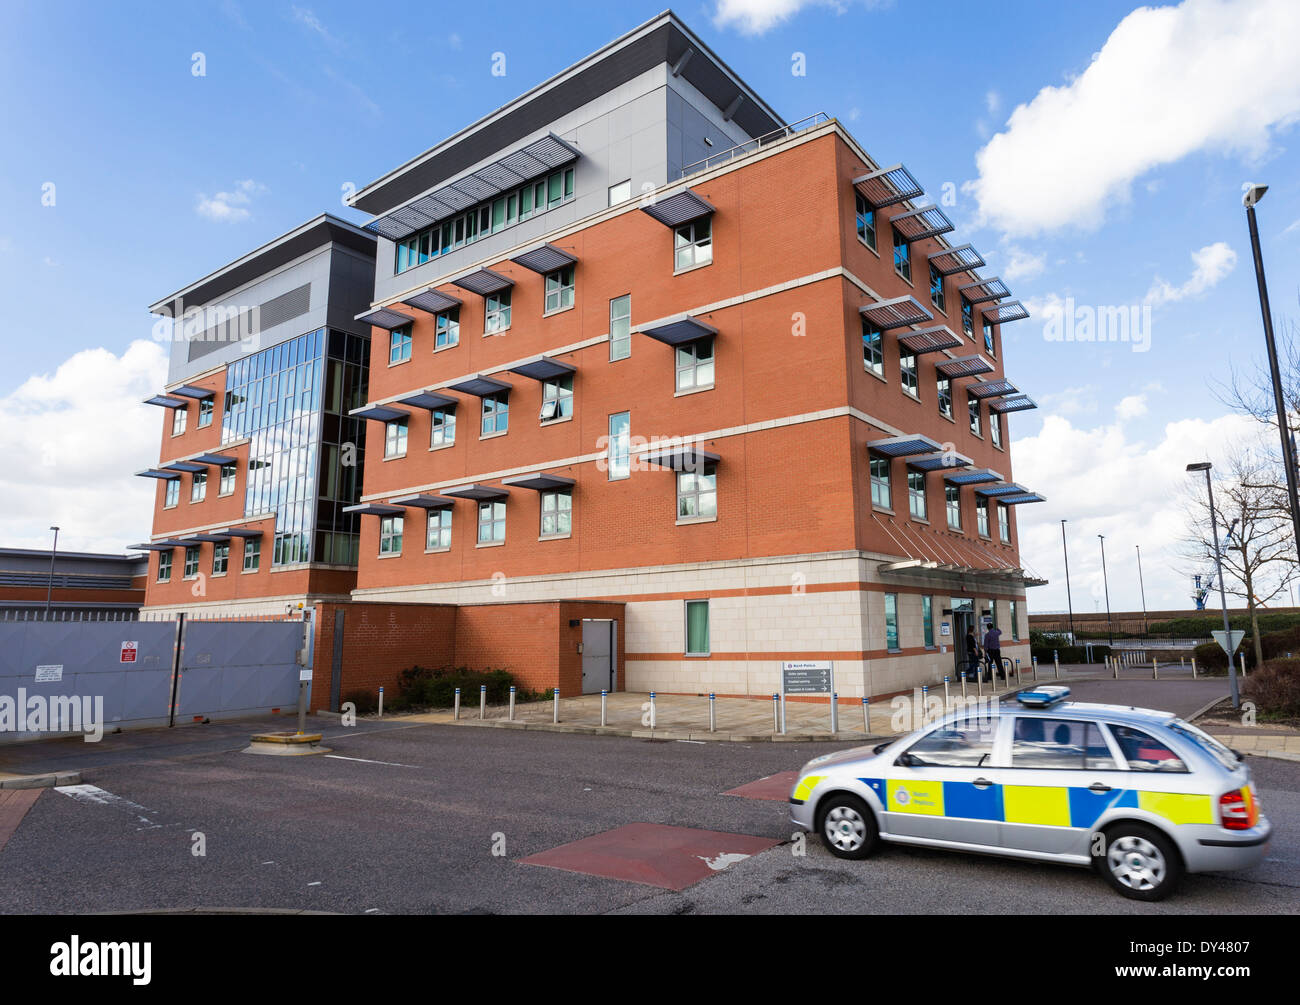 Kent Police Medway New Police Station Stock Photo